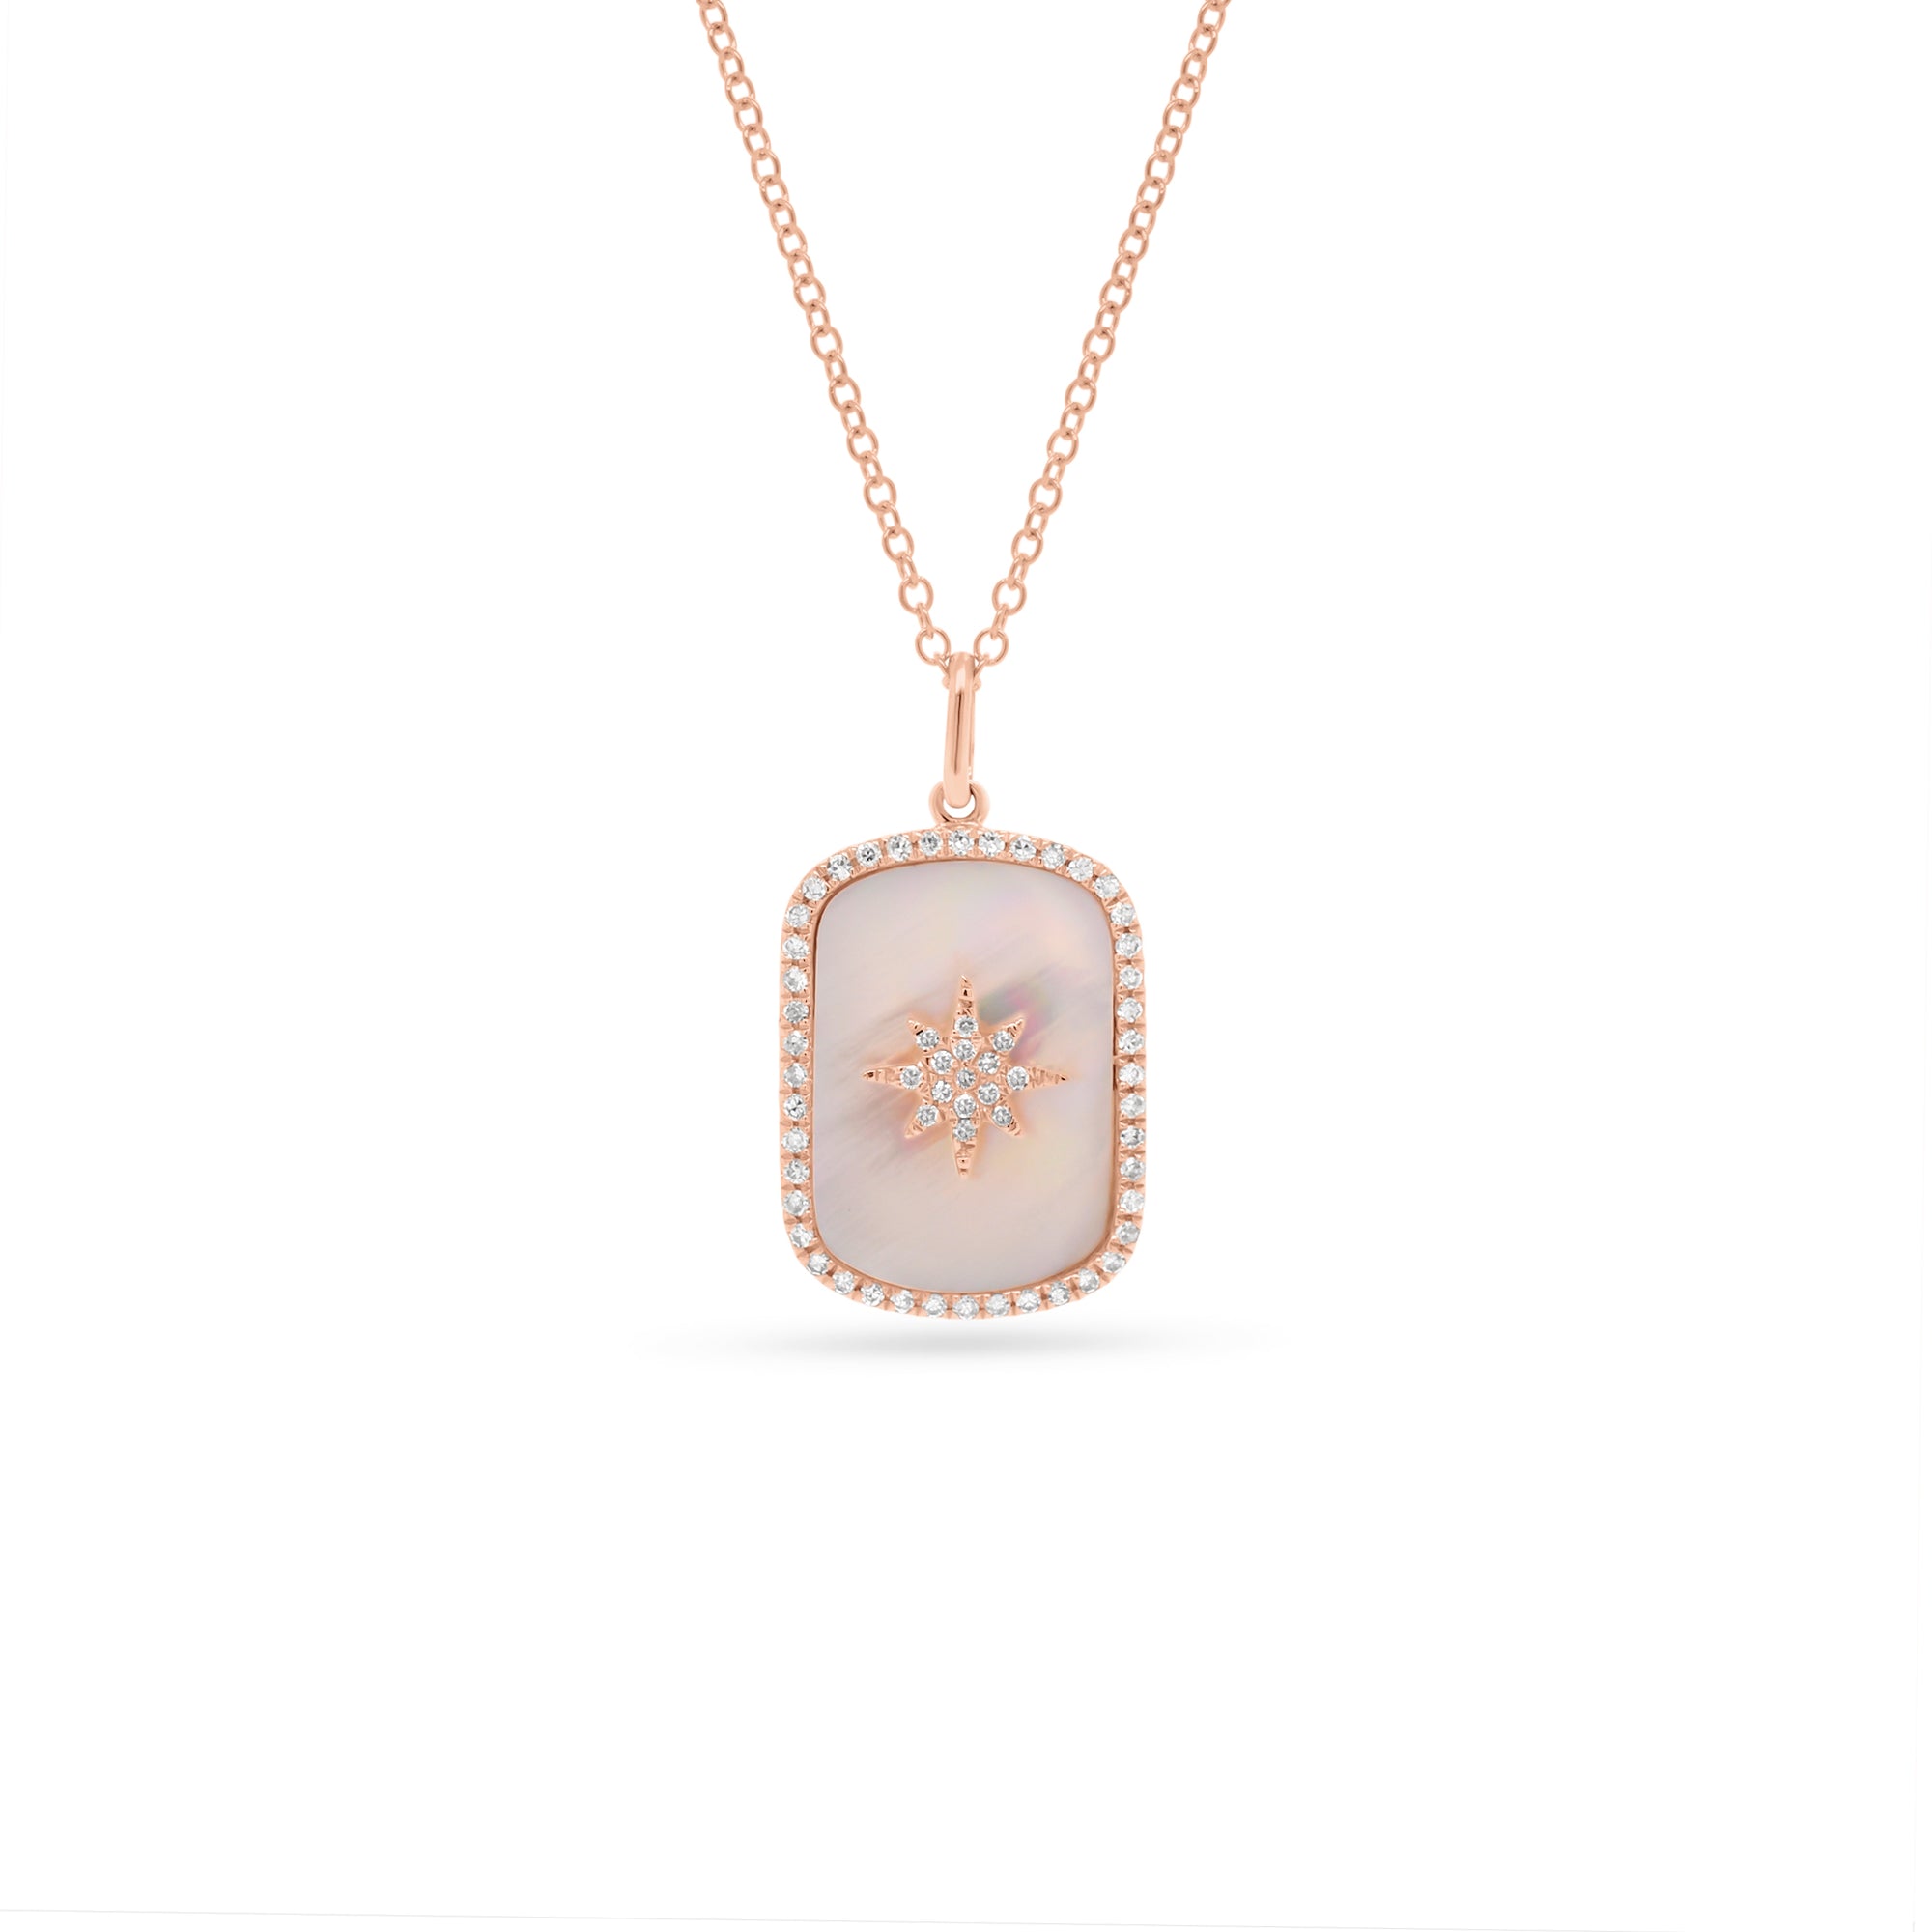 Diamond Starburst & Mother of Pearl Dog Tag Necklace  - 14K gold weighing 2.05 grams  - 59 round diamonds totaling 0.15 carats  - Mother of pearl